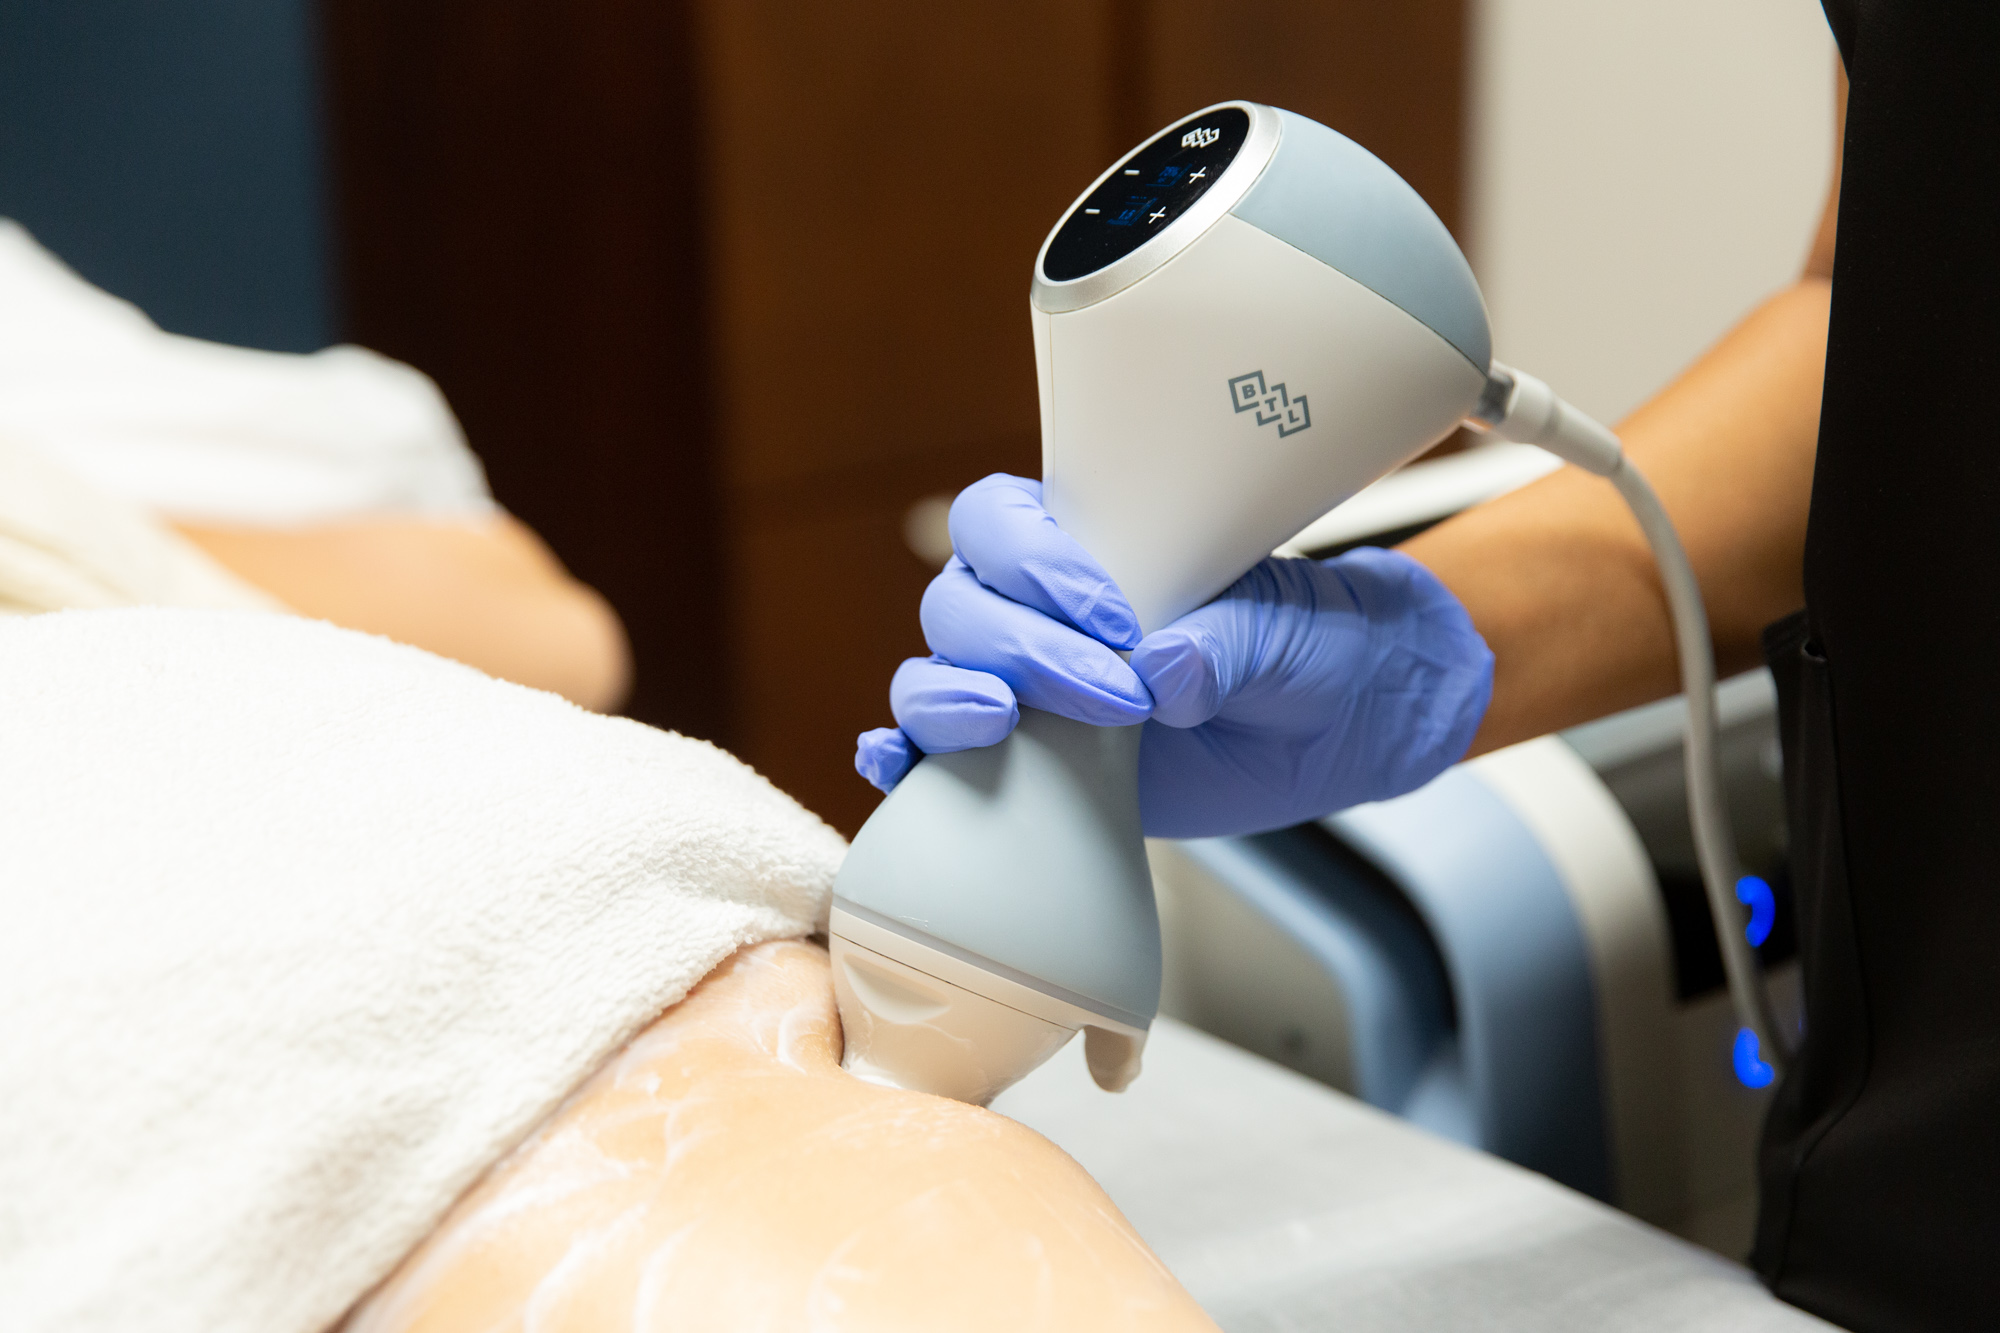 A Marcos Medical provider uses the Emtone application tool on a patch of bare skin on a patient's body. The tool is used by gently pressing down on the patient's skin. Very little skin can be seen, the rest is covered by towel.